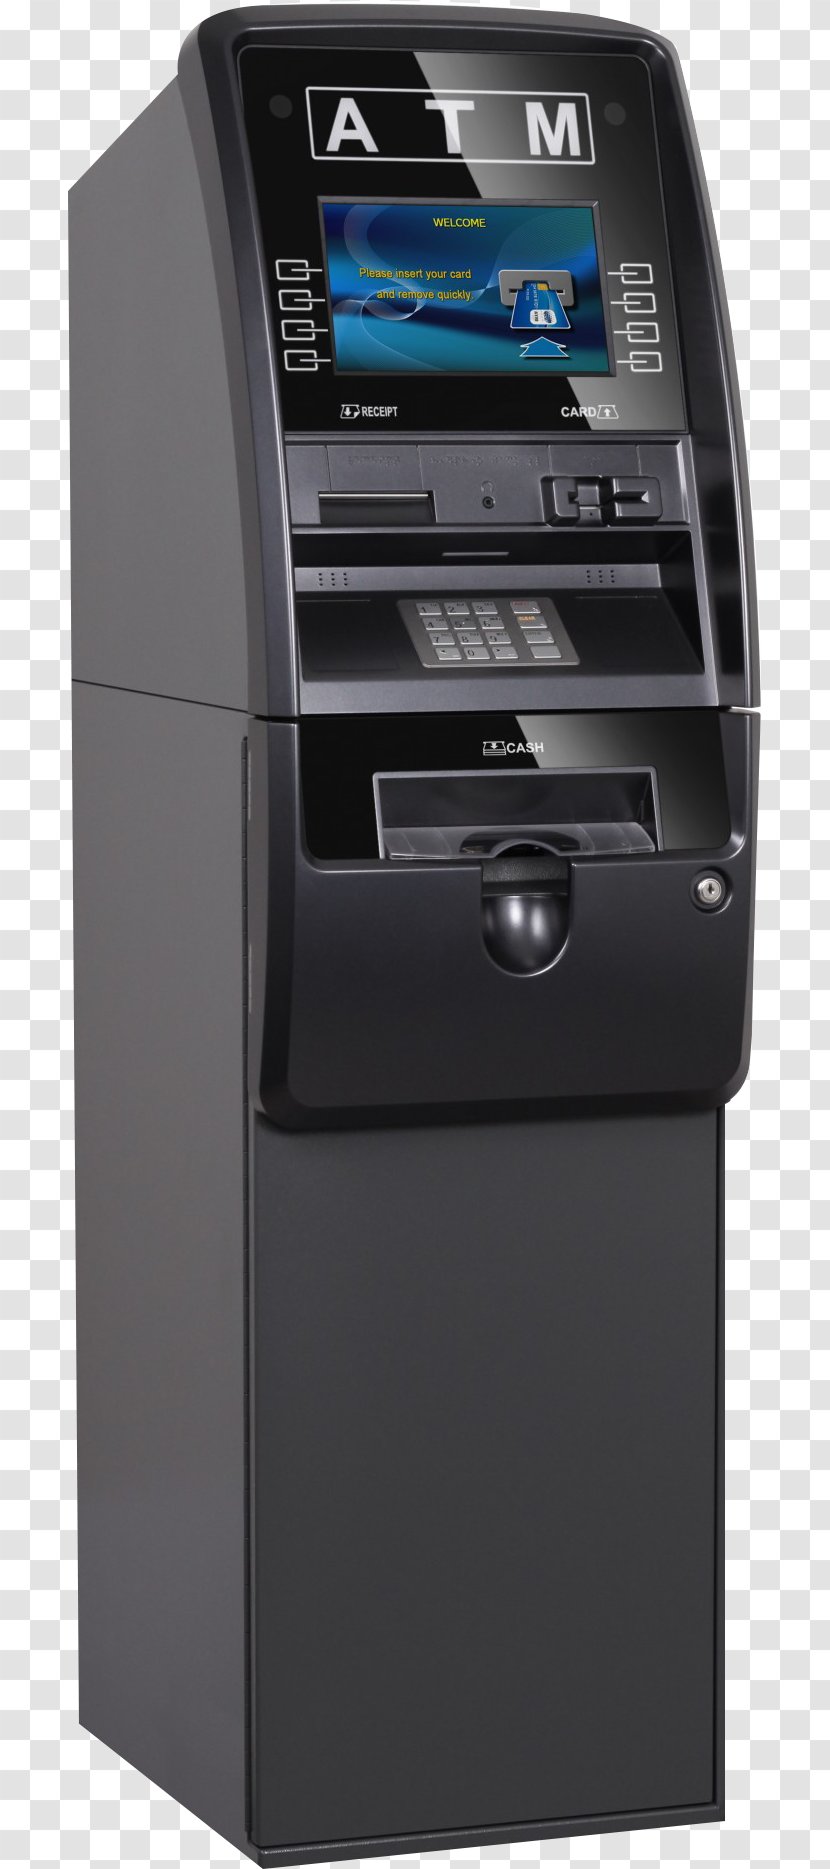 Automated Teller Machine EMV ATM Card Empire Atm Group - Payment Industry Data Security Standard Transparent PNG